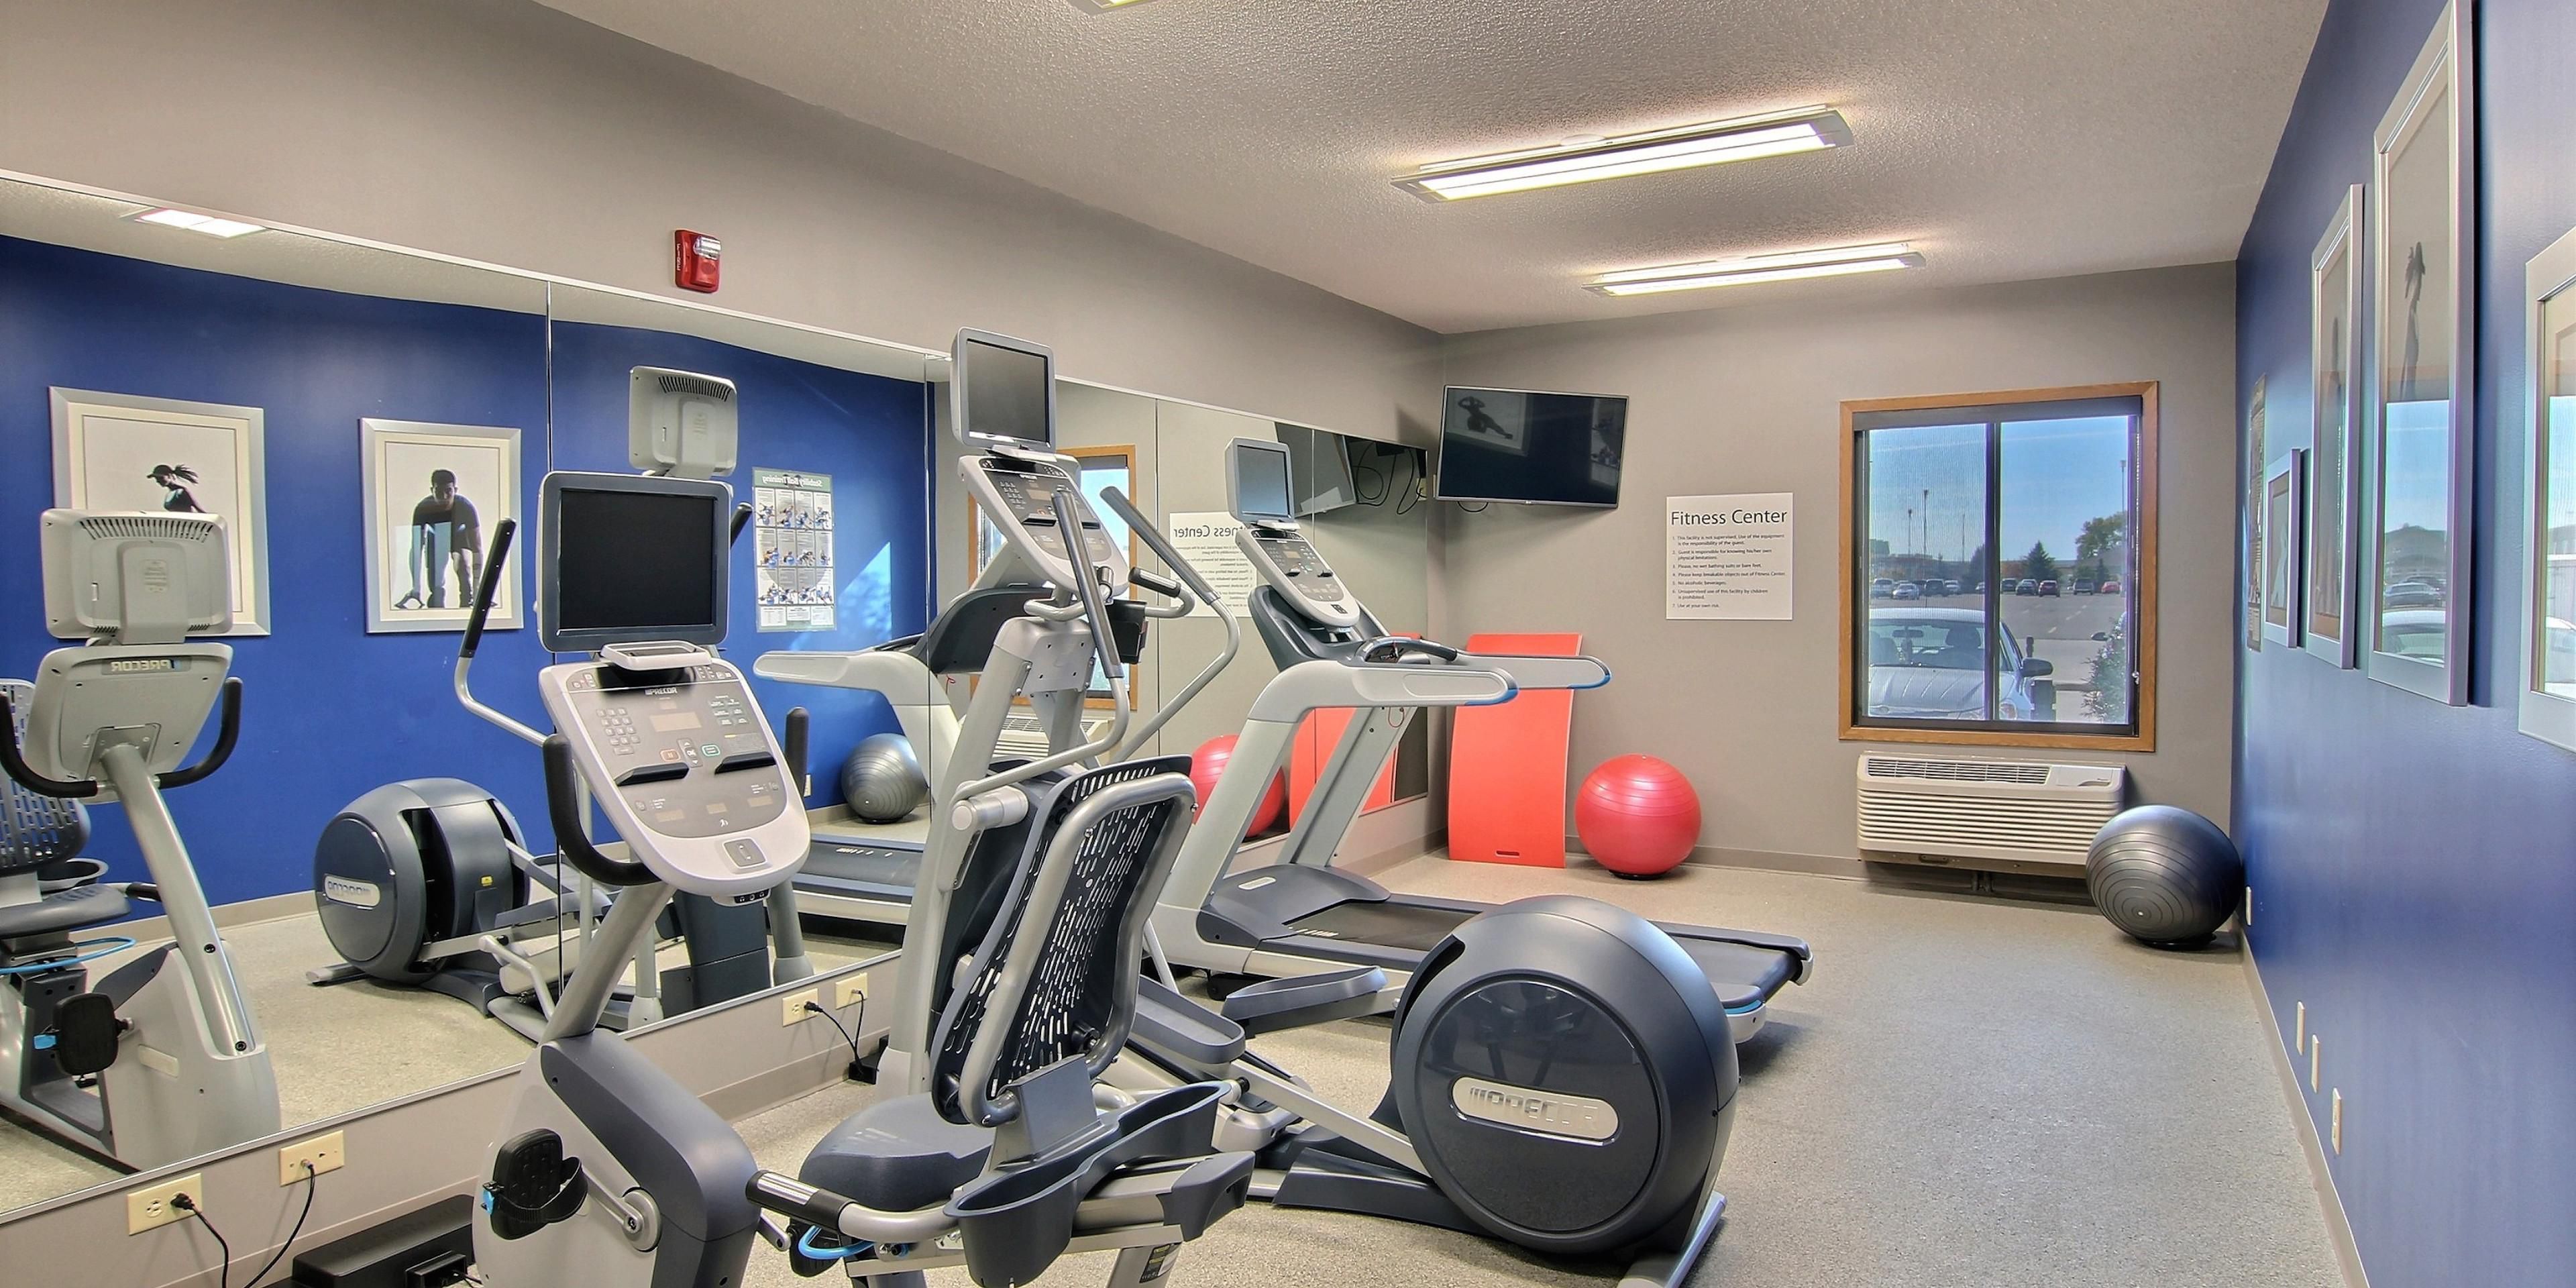 Our on-site fitness center is available 24/7 for guests to reach their fitness goals during travel!